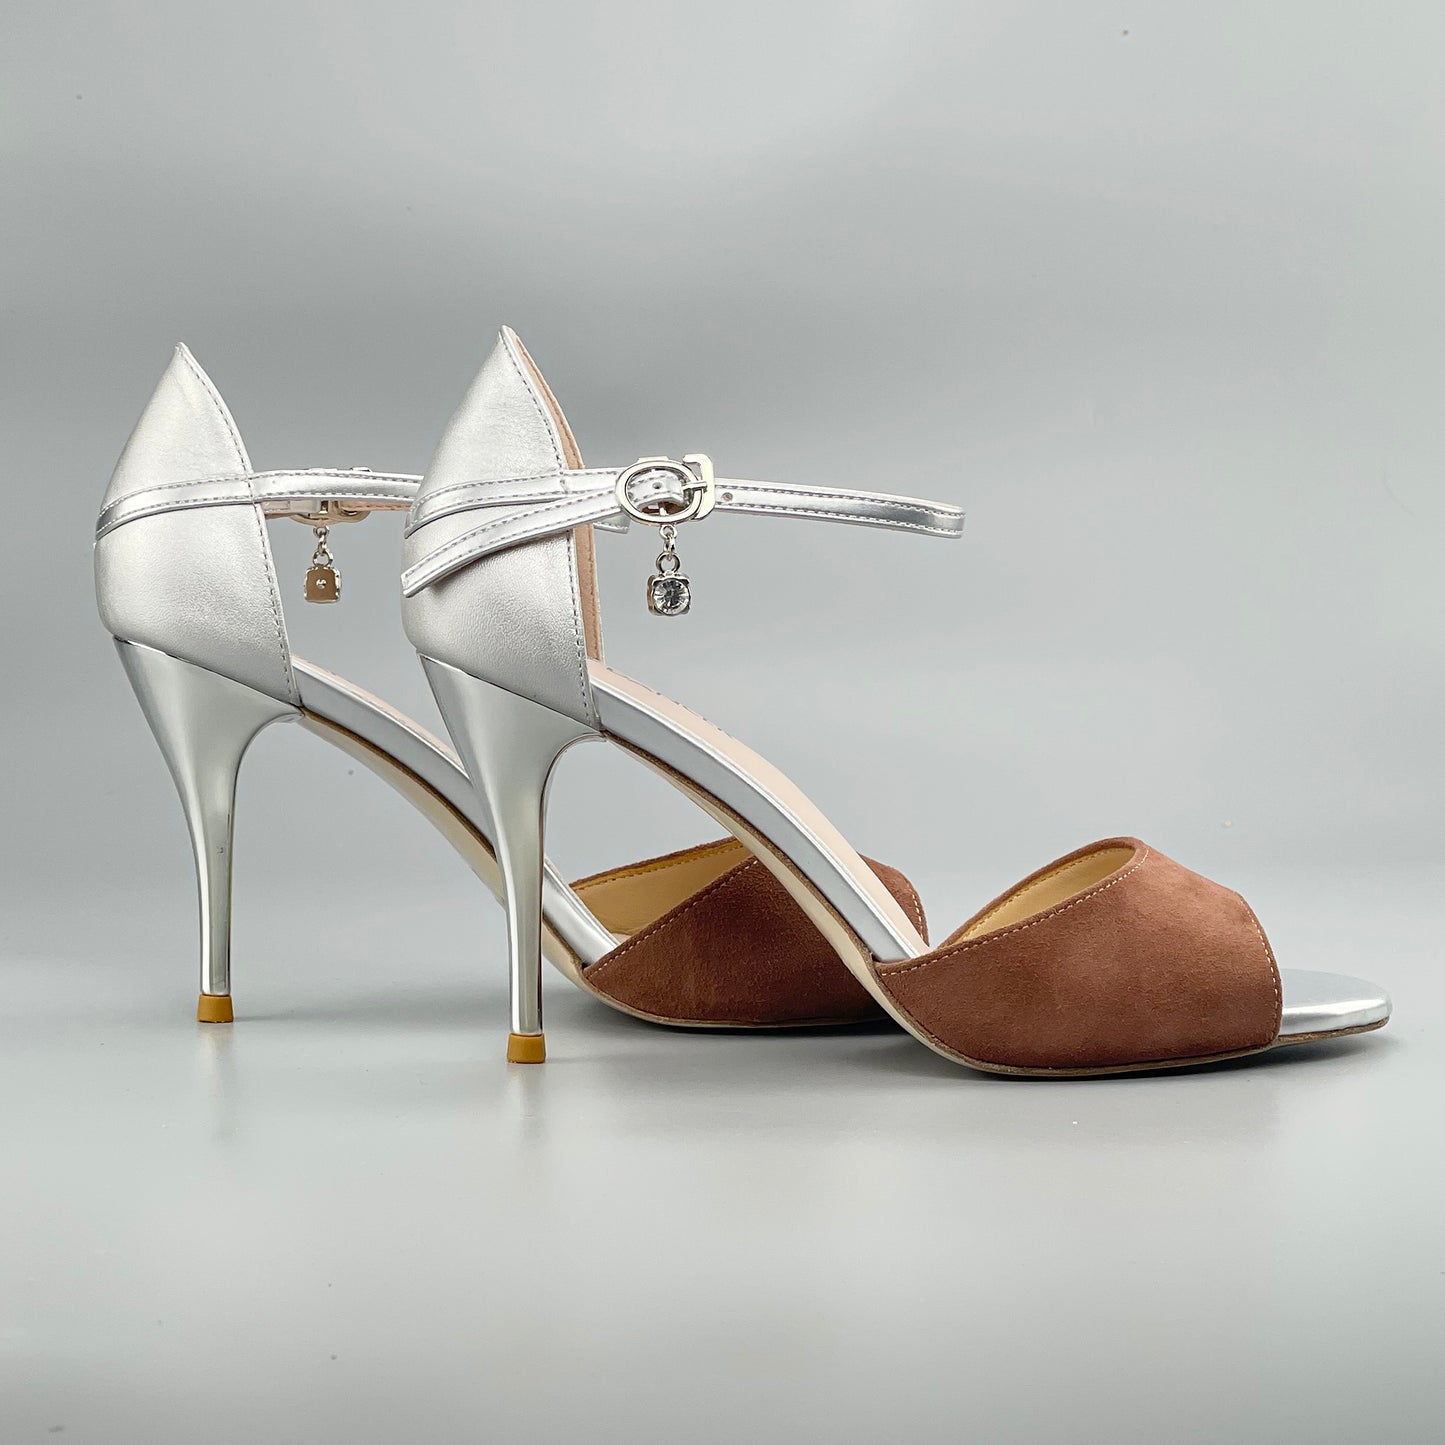 Pro Dancer Open-toe Argentine Tango Shoes Closed-back High Heels Hard Leather Sole Brown and Silver (PD-9042E)